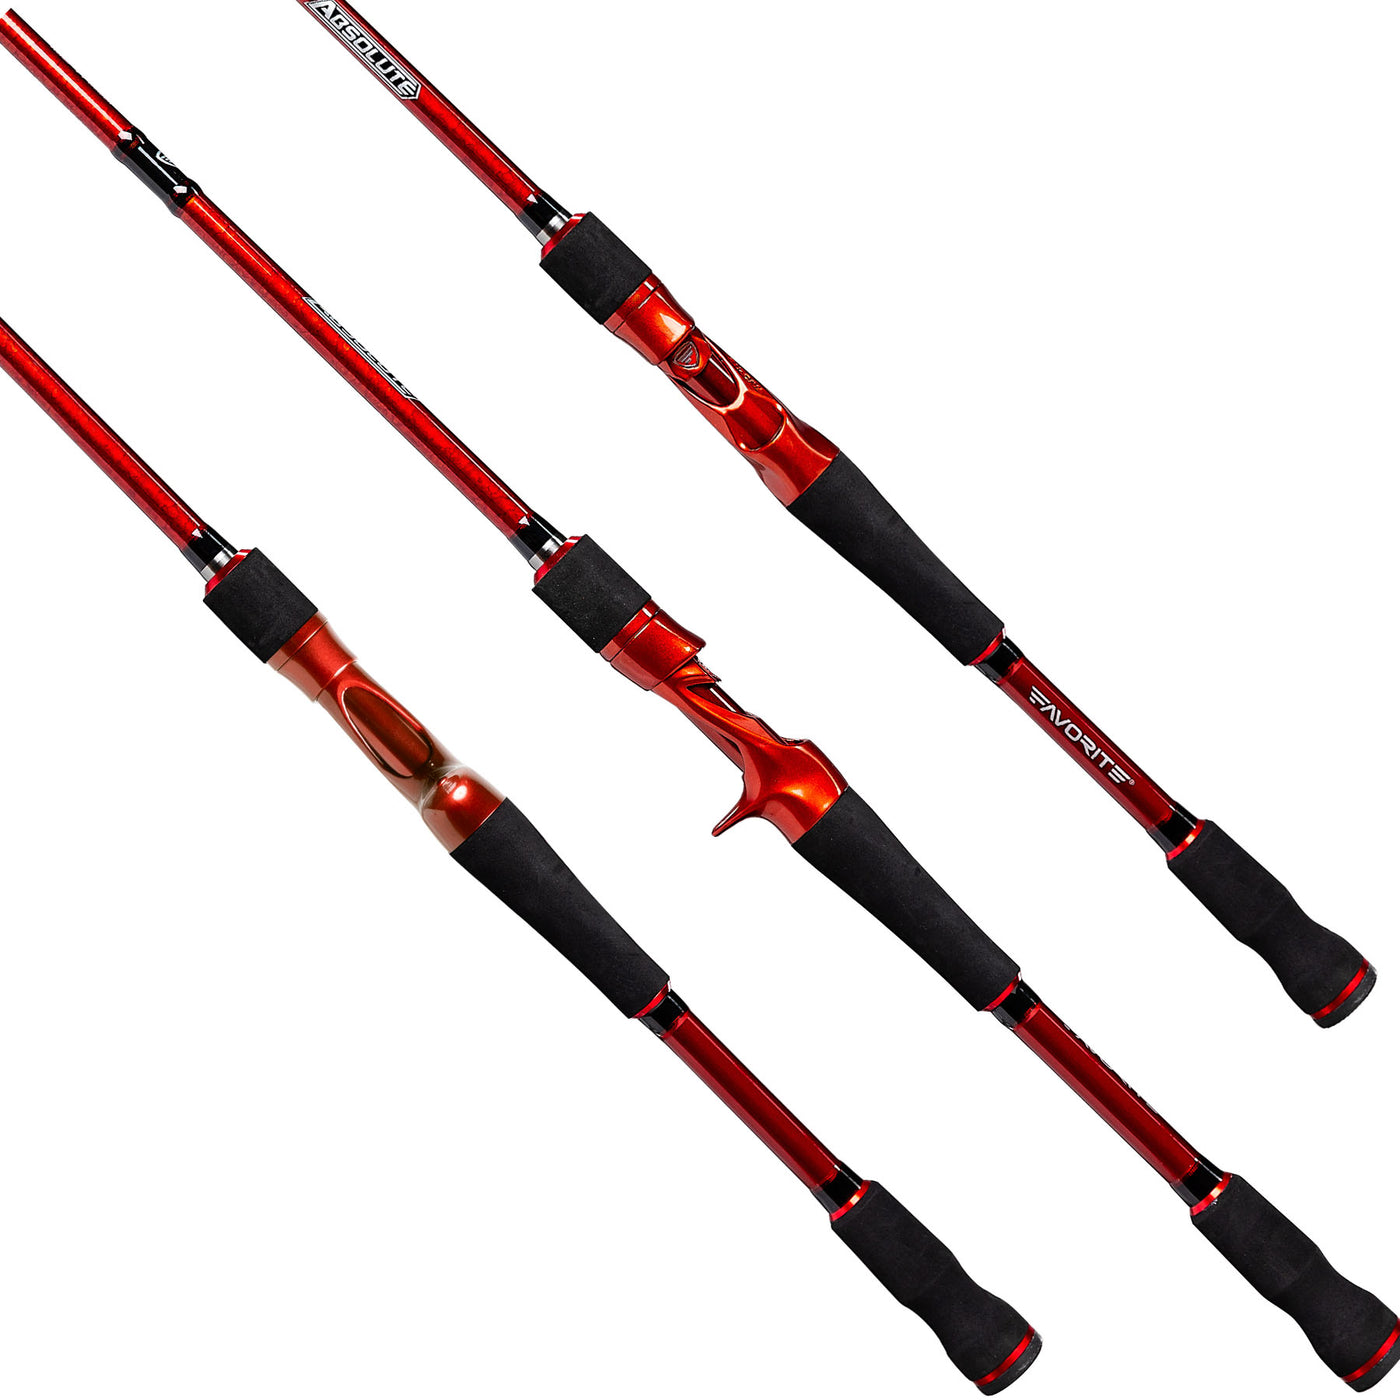 Favorite - Absolute Casting Rod